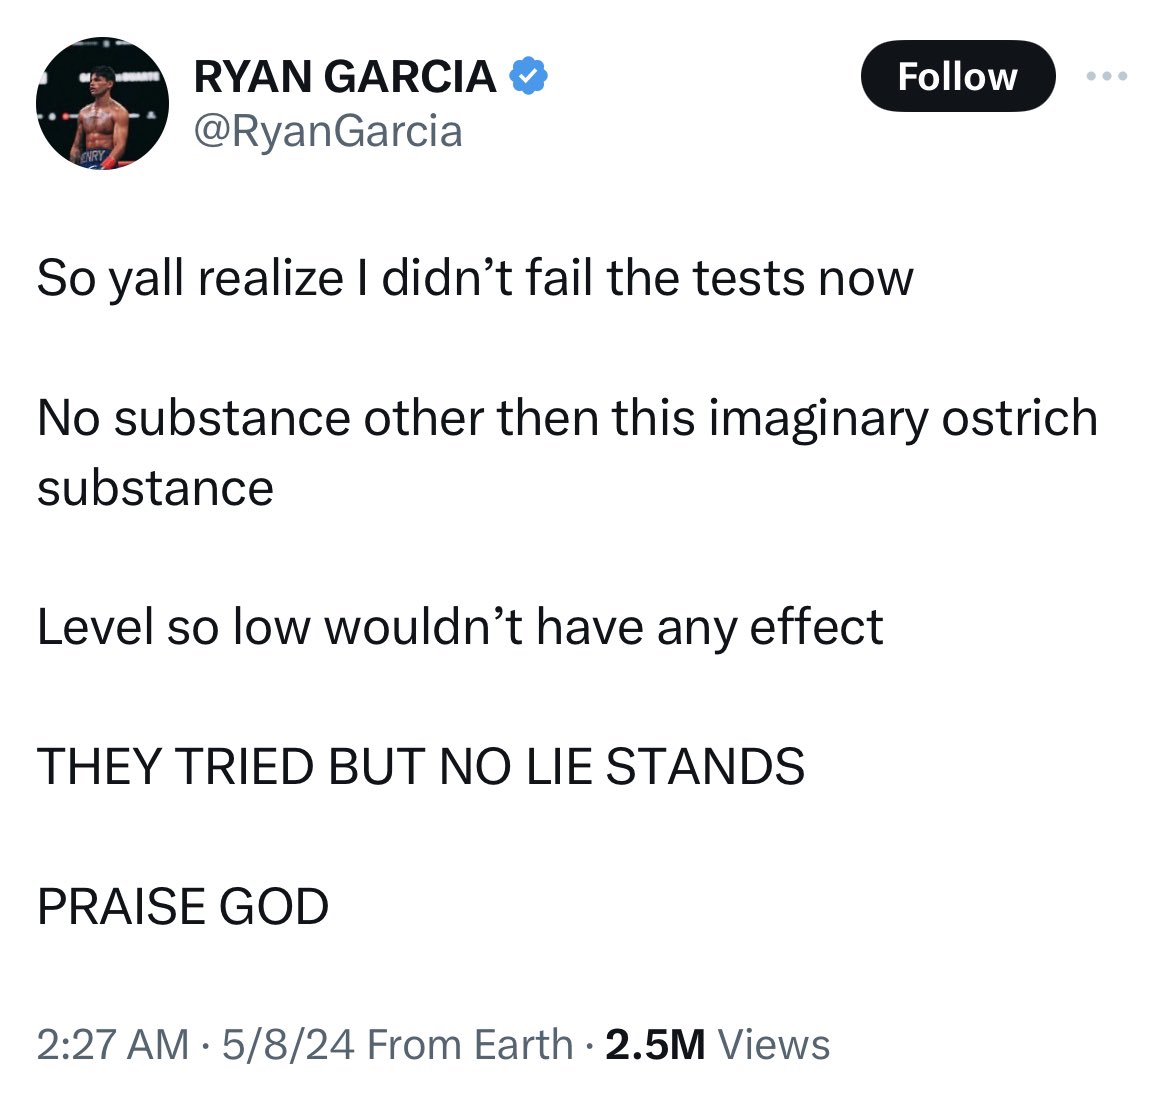 Apologize To Ryan Garcia‼️ It has been declared by the authorities that the accusation of him having nandrolone was fake news as he never tested positive for it… It has also been declared that the ostarine substance was at such a low level that it will likely be considered as…